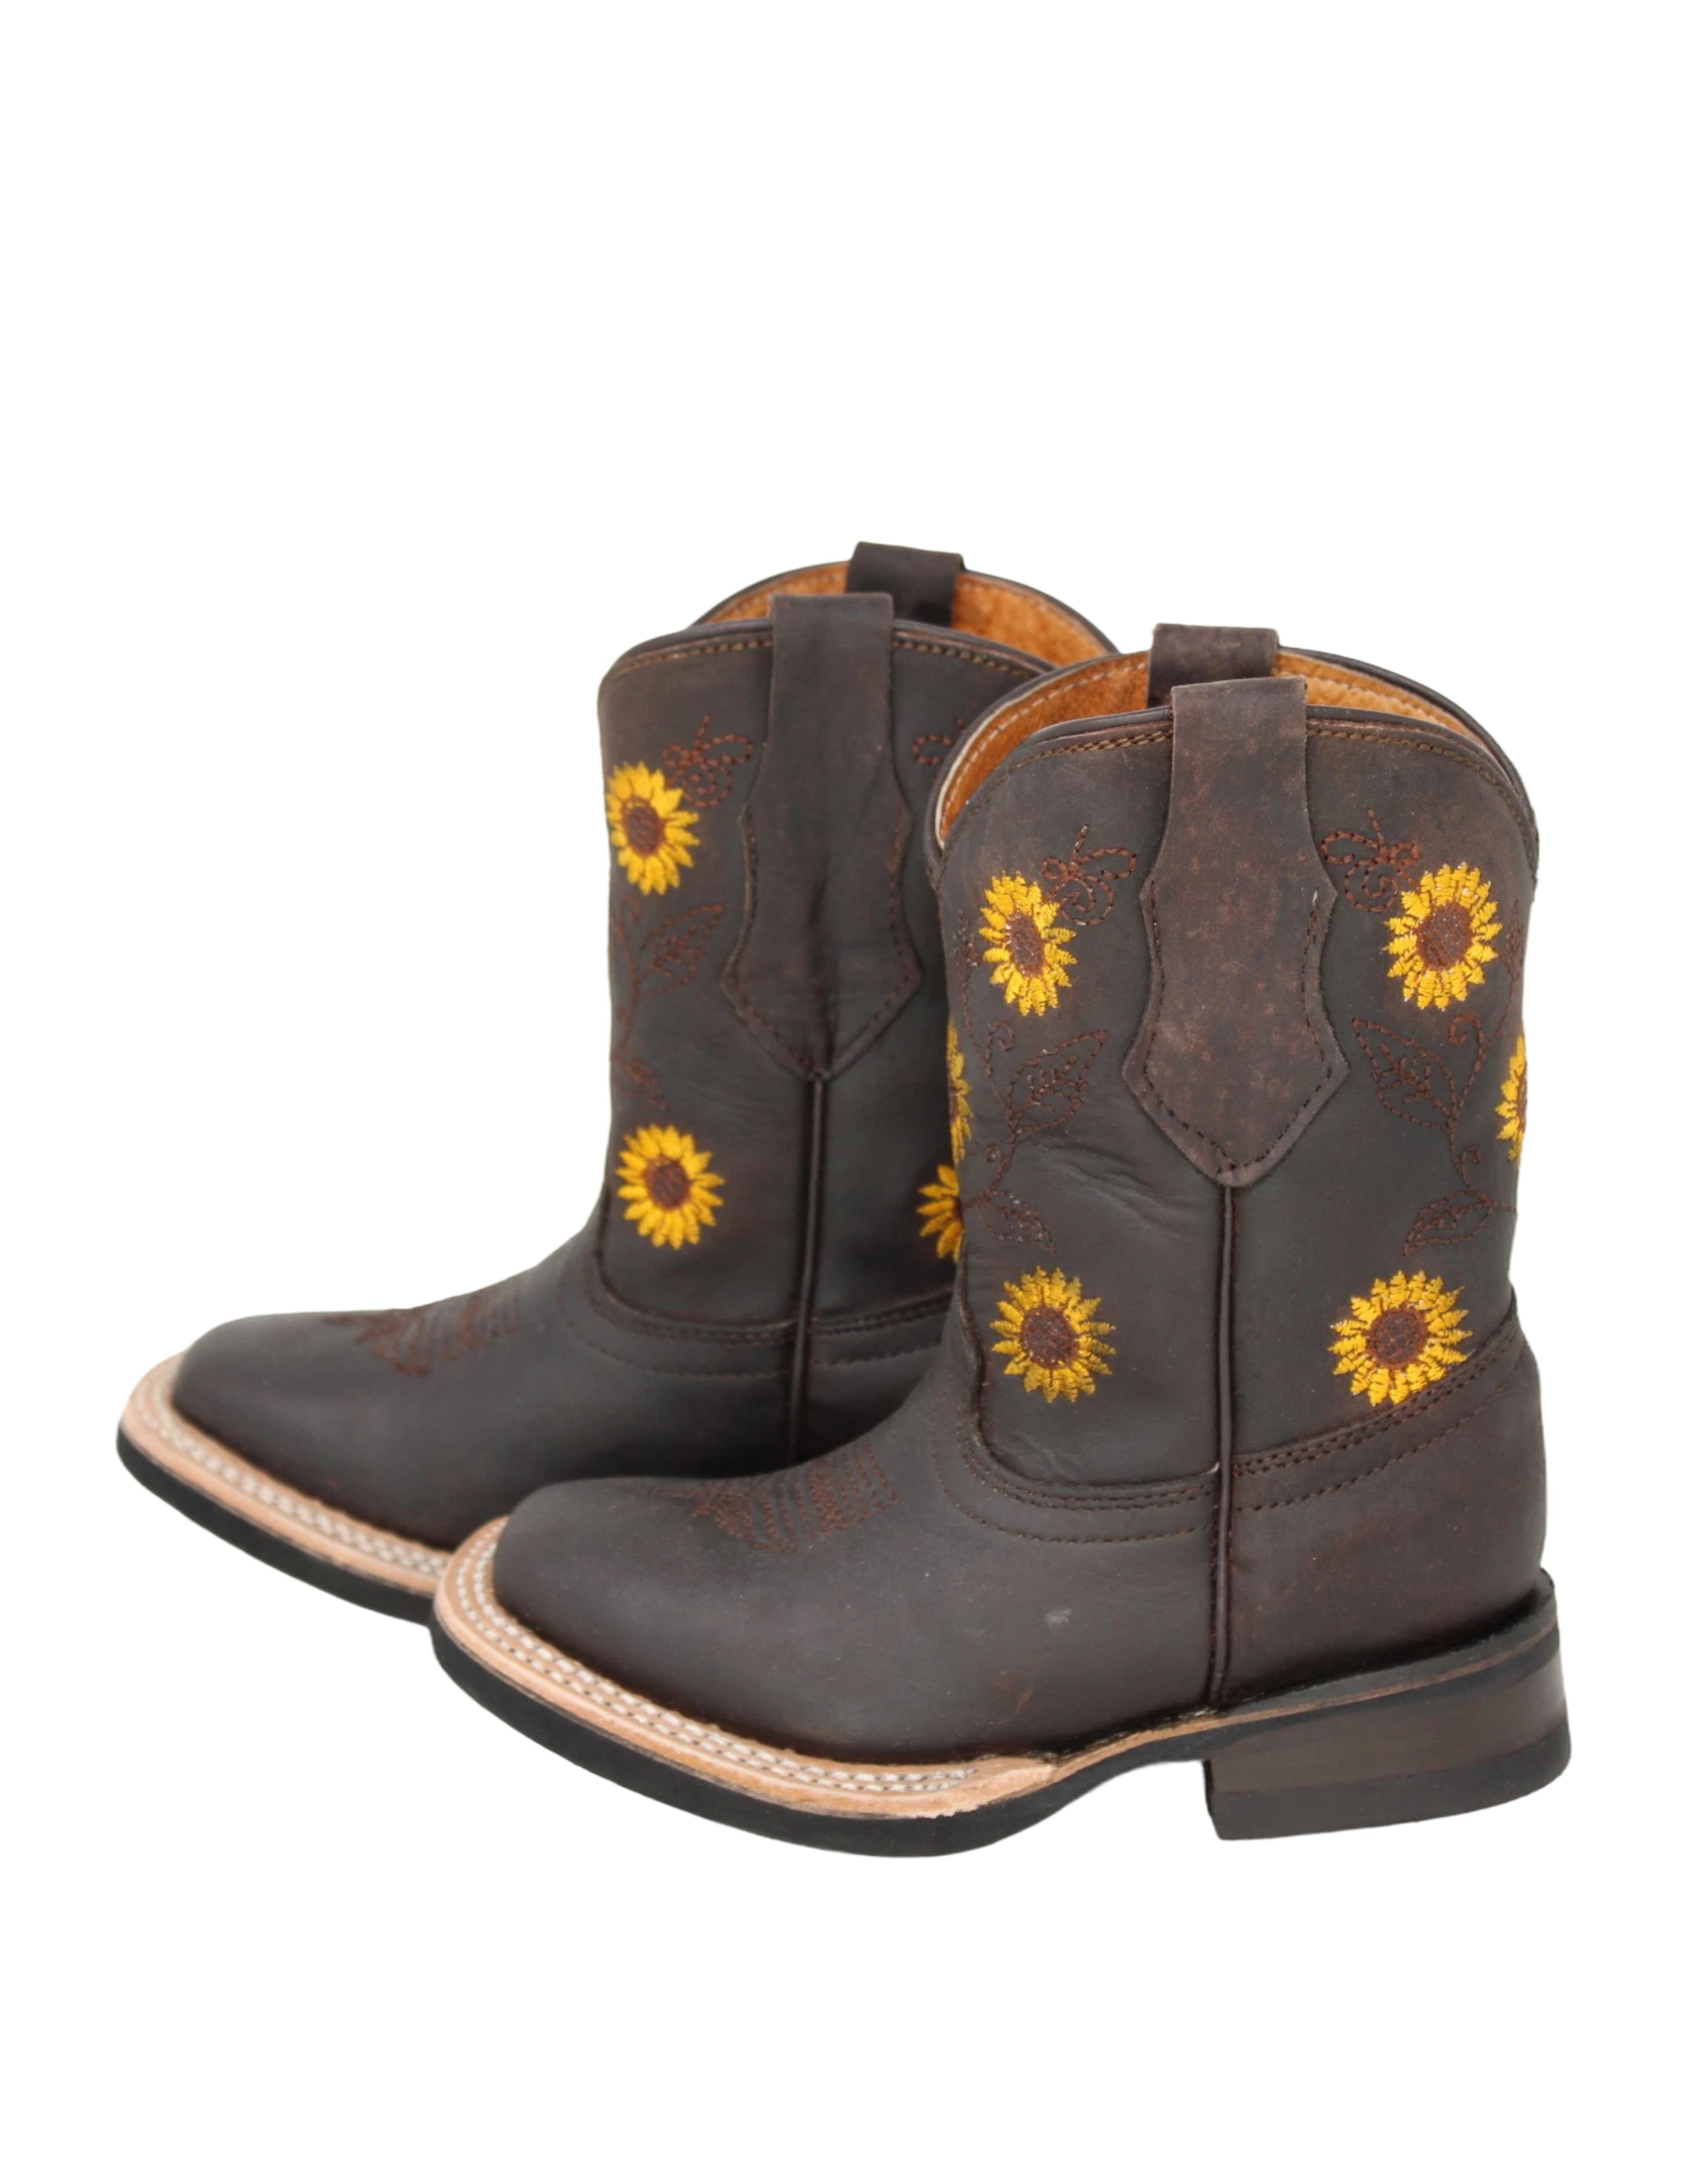 Iris Leather Floral Kid’s Boot